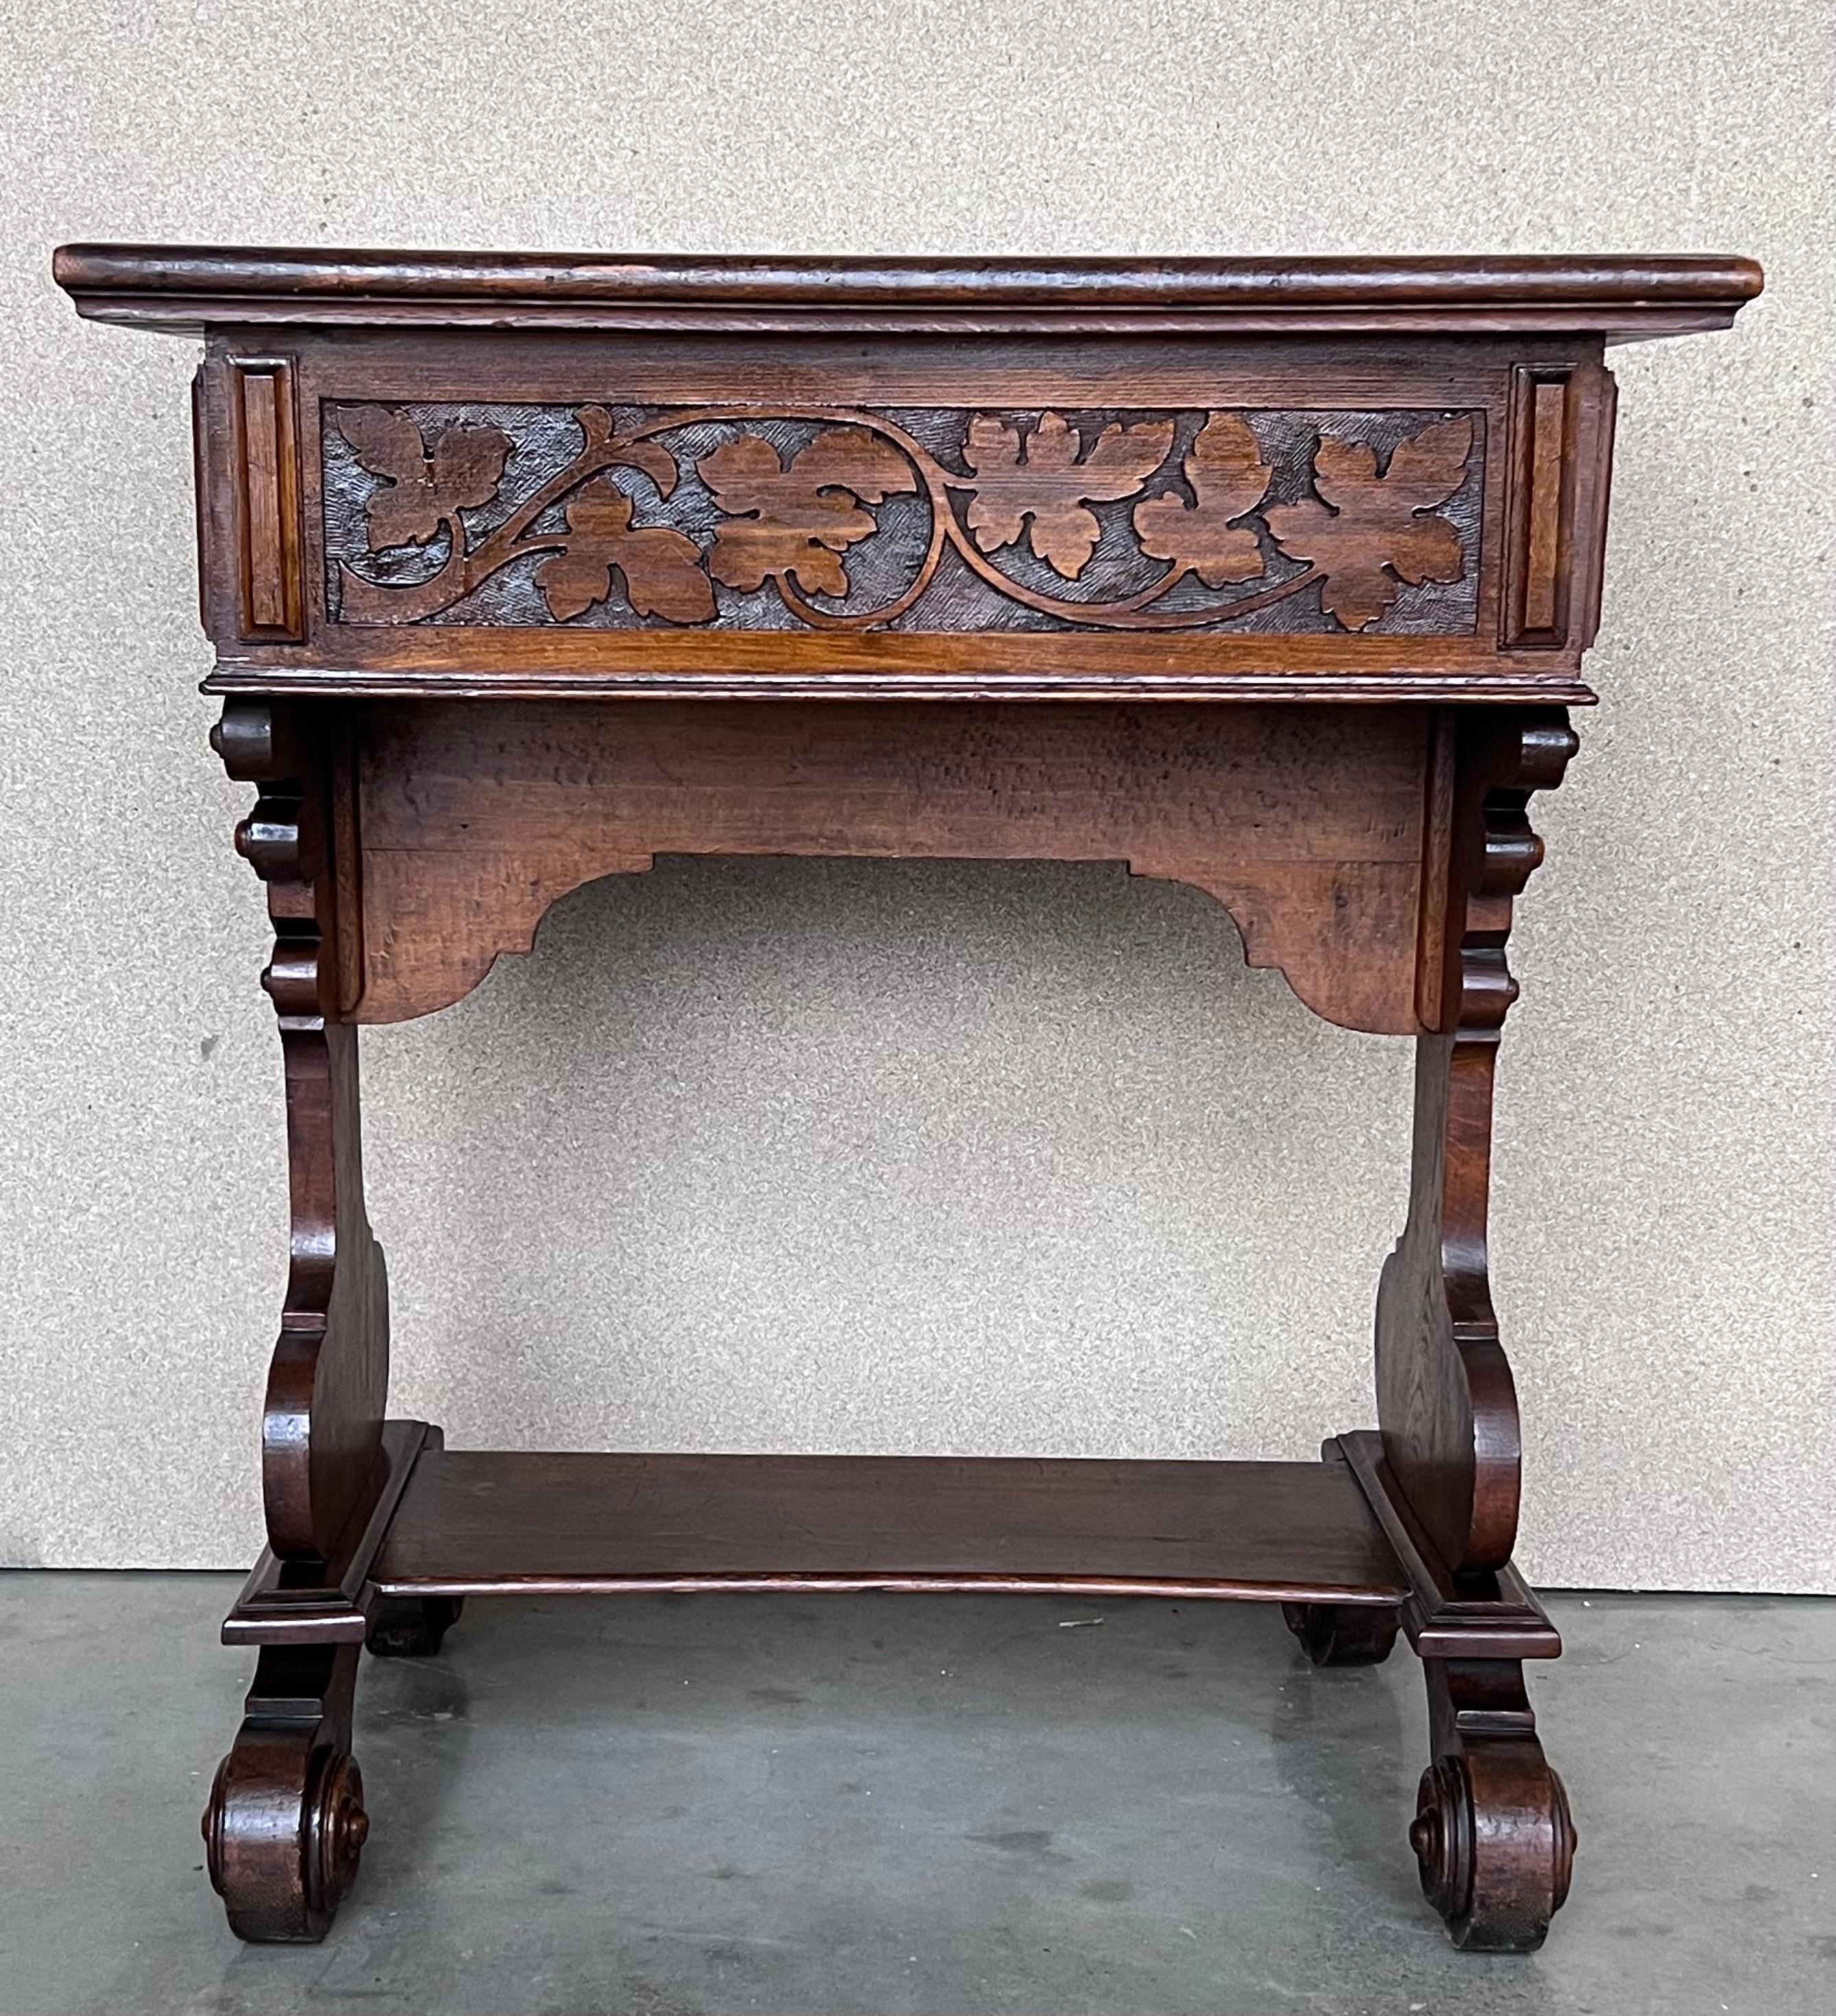 Early 20th carved walnut side table or cart with large drawers and wheels.